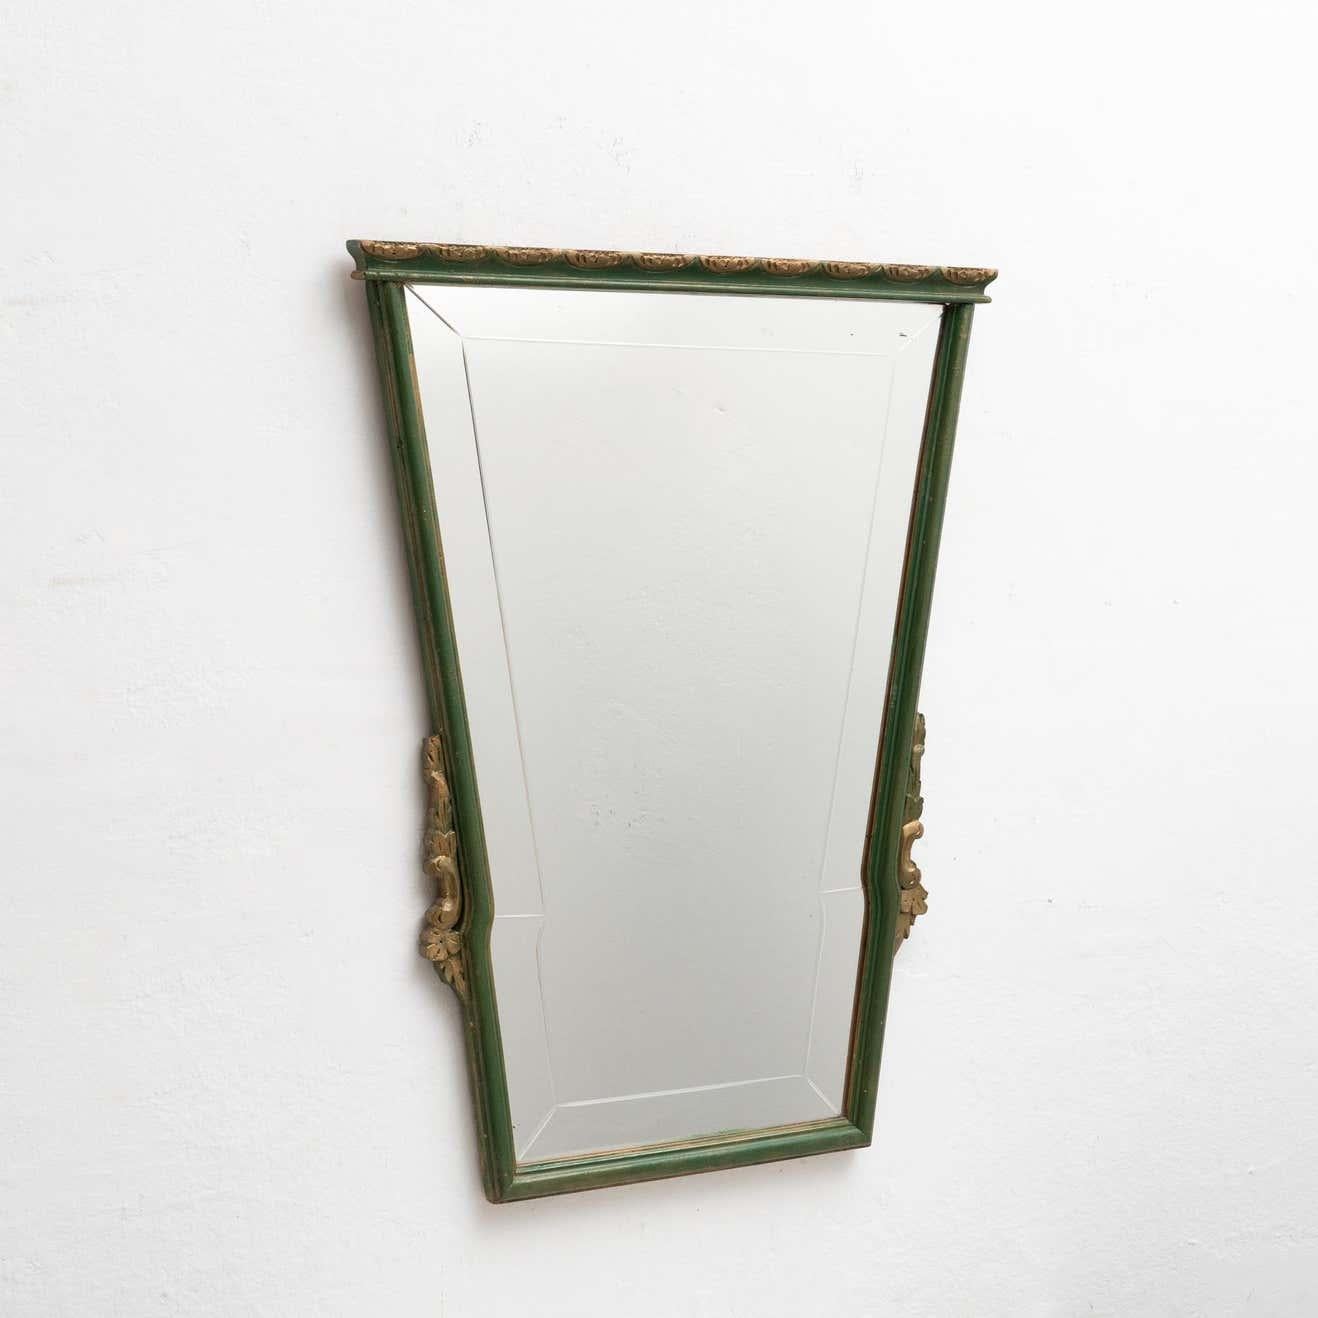 Antique Spanish handcrafted wooden mirror.

Manufactured by unknown designer in Spain, circa 1940

In original condition, with minor wear consistent of age and use, preserving a beautiful patina.

Materials:
Mirror.
Wood.